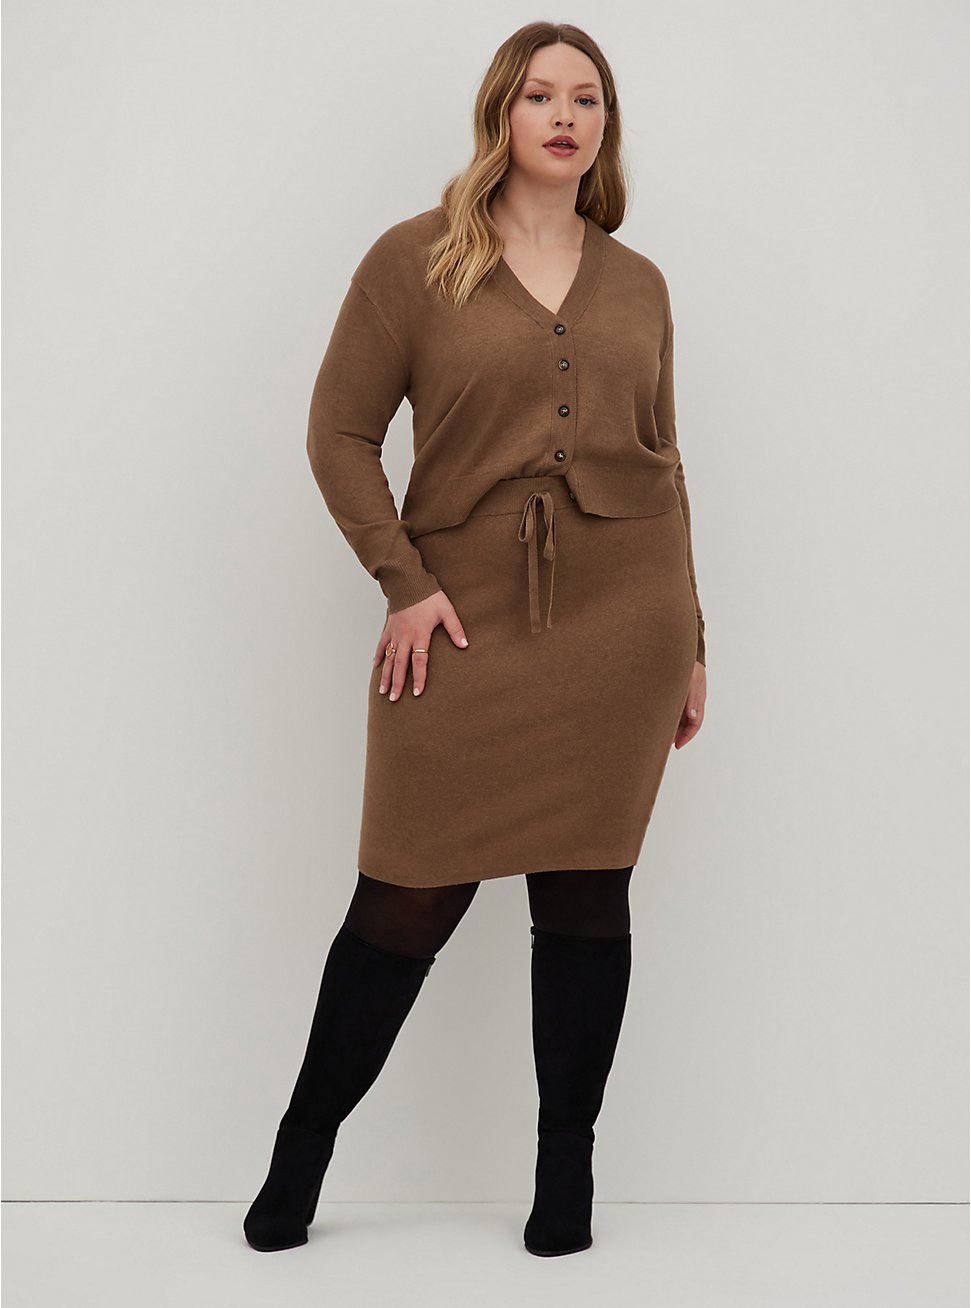 Pencil Skirt - Luxe Cozy Sweater Brown, CARIBOU, hi-res